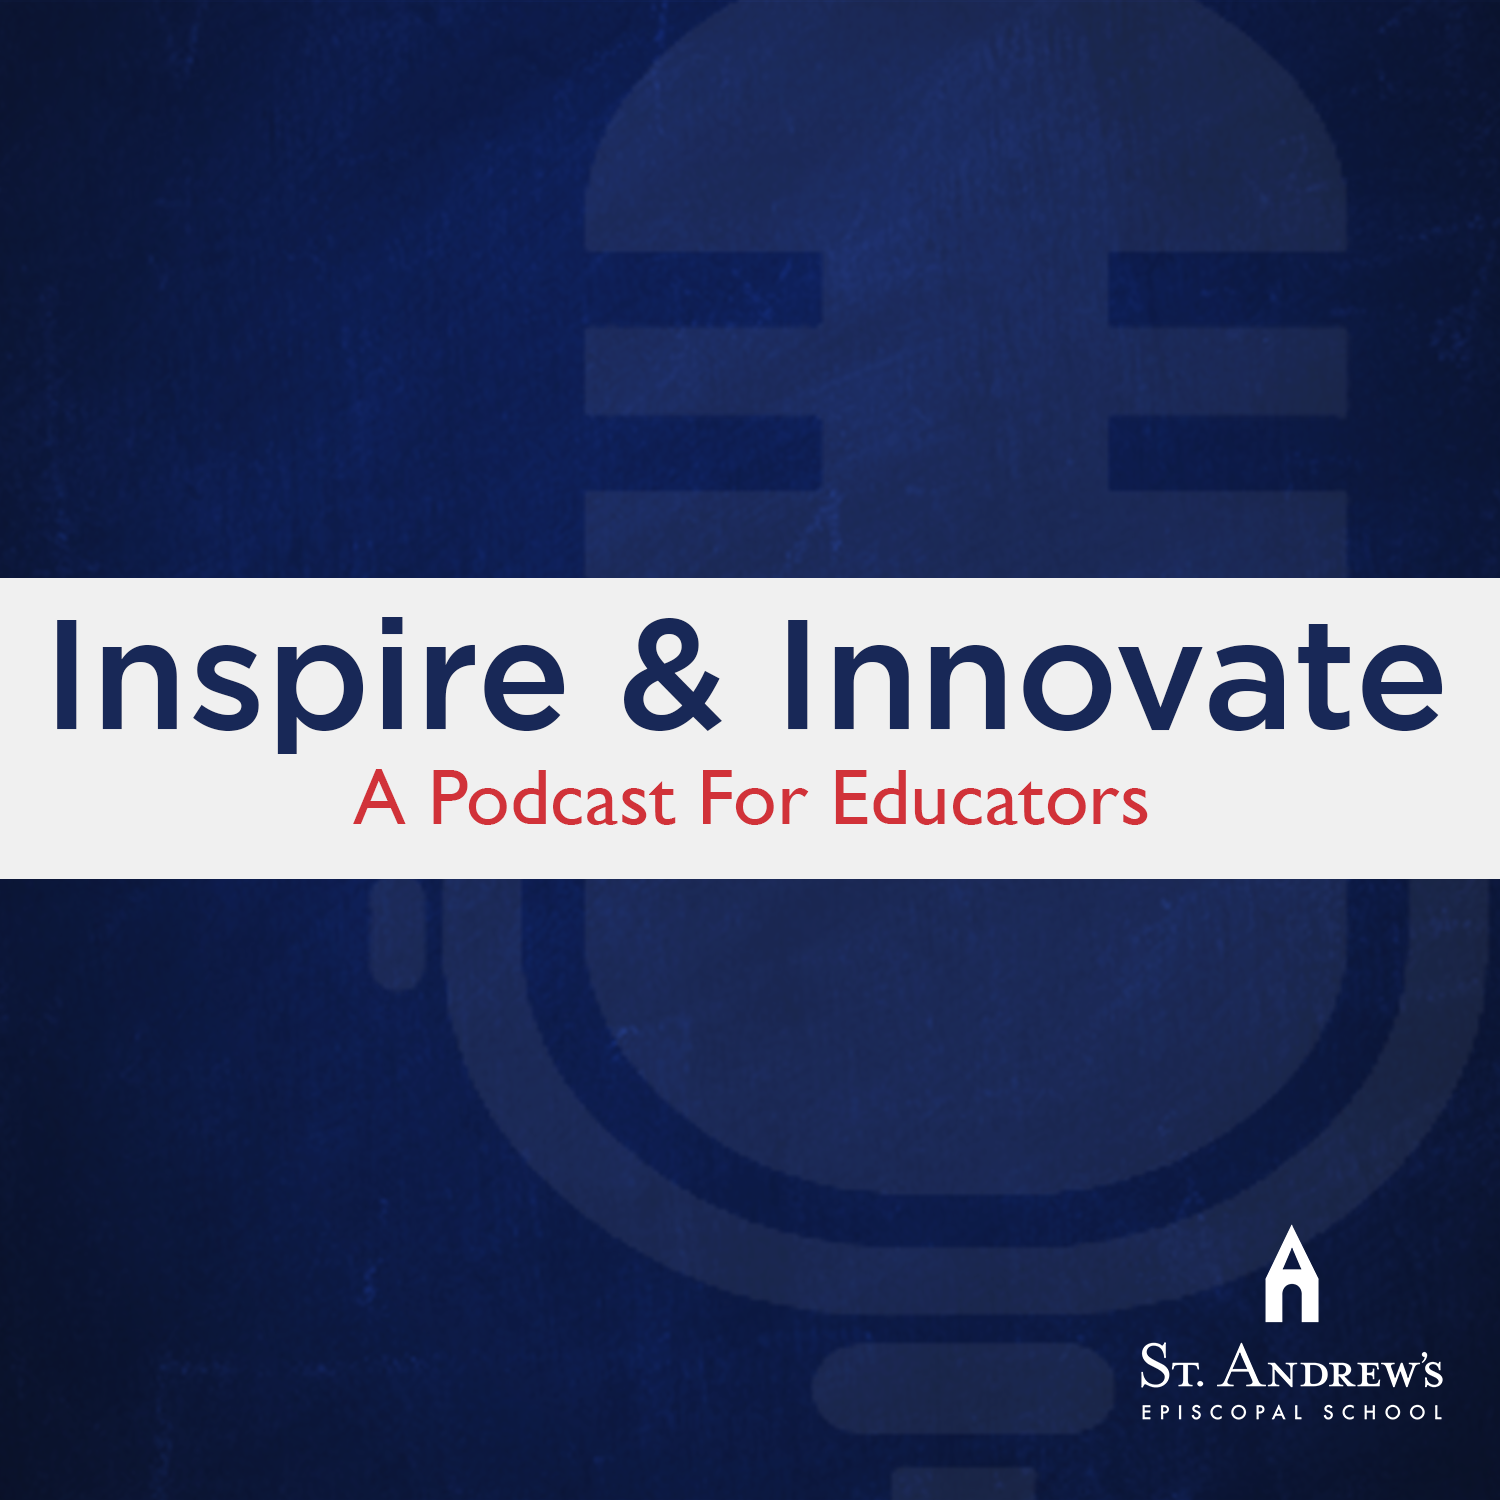 Inspire & Innovate: A Podcast for Educators